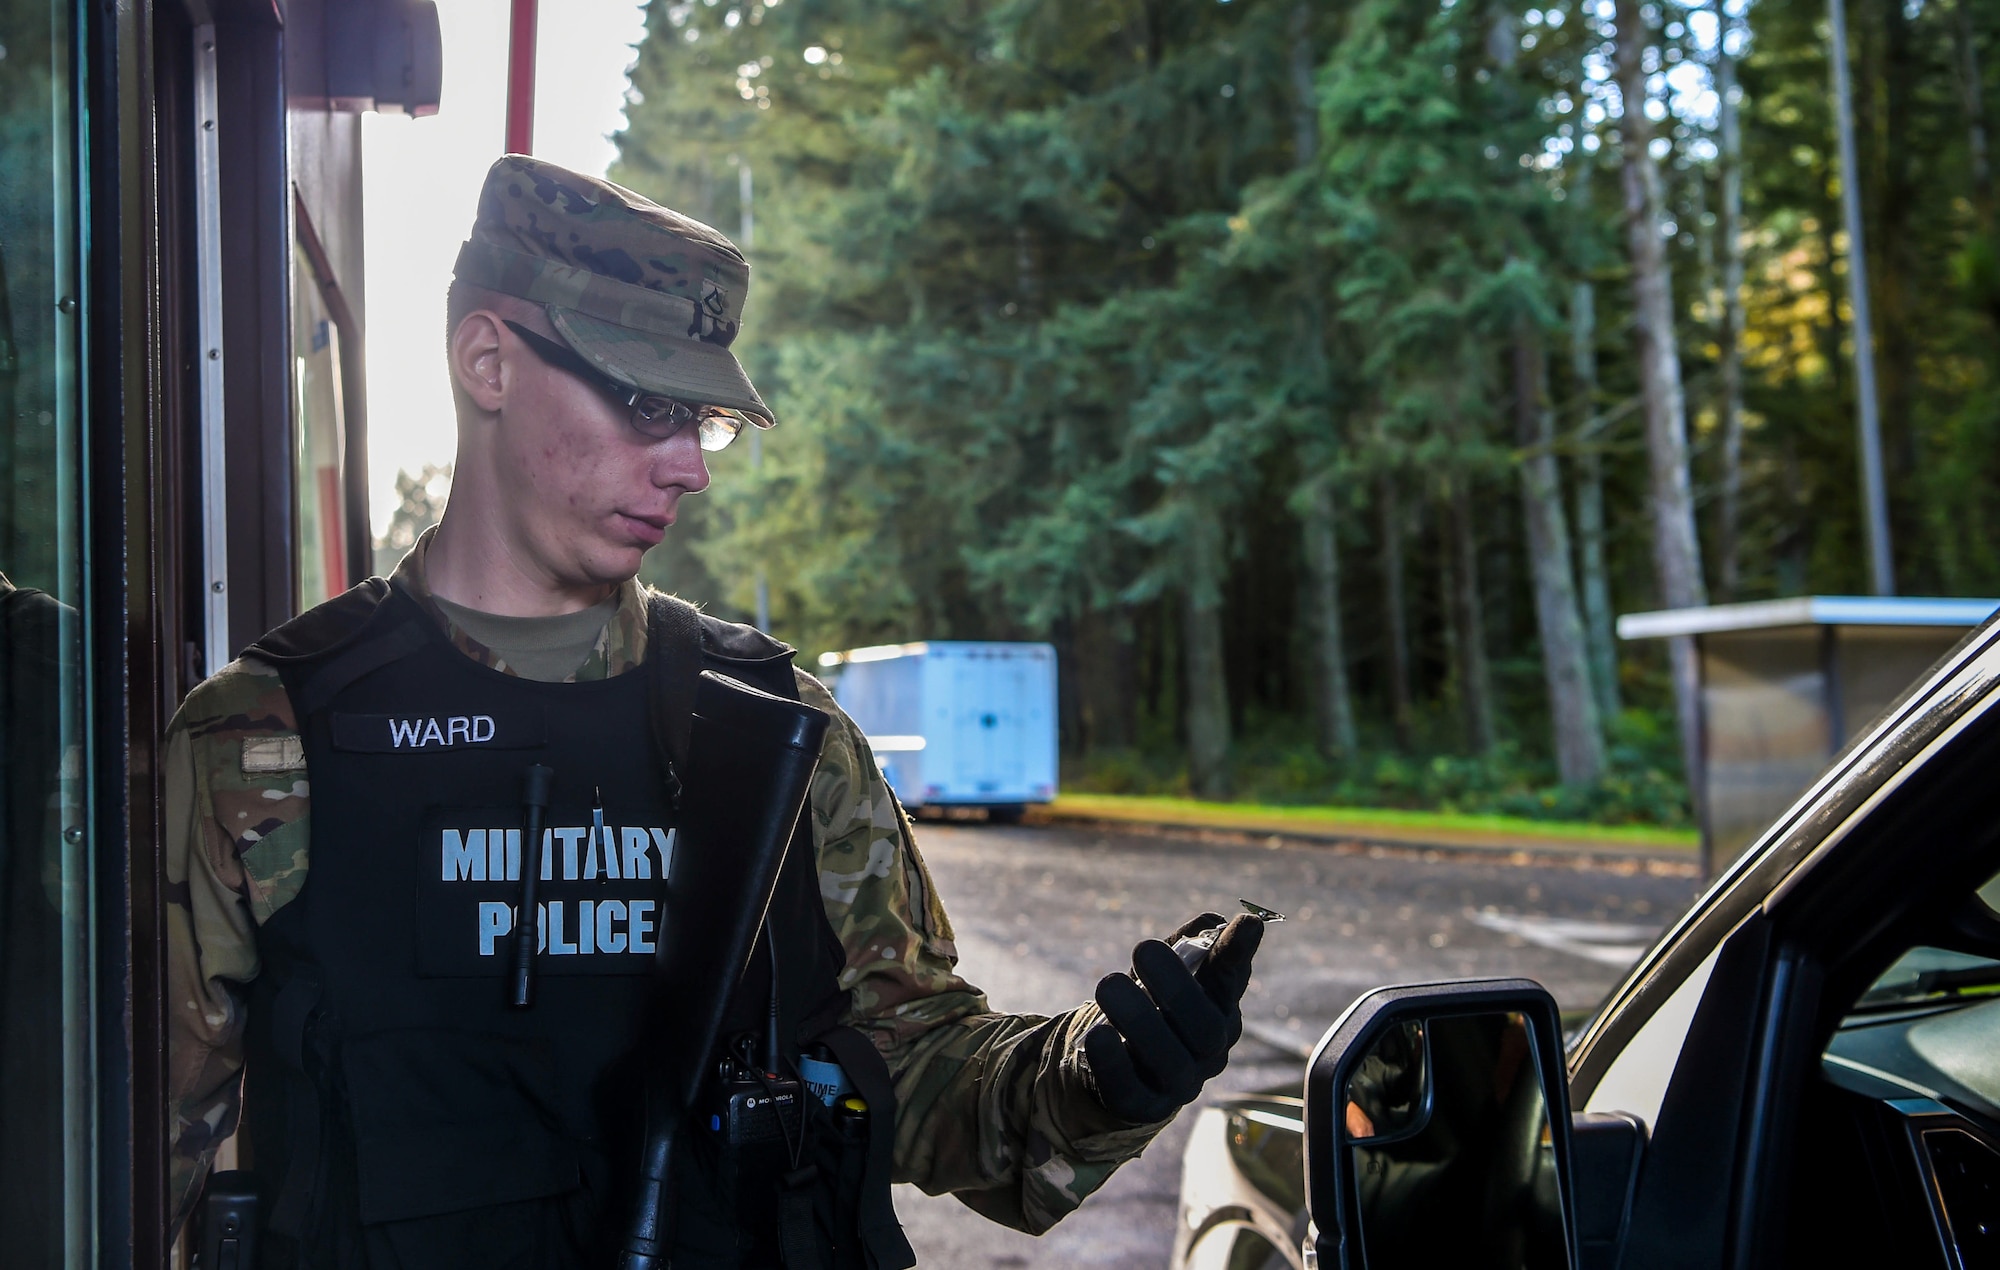 U.S. Army Private First Class James Ward, 170th Military Police Company military police, verifies access credentials at the McChord Field main gate, Joint Base Lewis-McChord (JBLM), Wash., Nov. 2, 2018. Overseeing operational control of the day-to-day law enforcement mission and access control is part of the provost marshal duties. U.S. Air Force Maj. Michael Holt, 627th Security Forces Squadron commander, recently became JBLM deputy provost marshal. (U.S. Air Force photo by Senior Airman Tryphena Mayhugh)